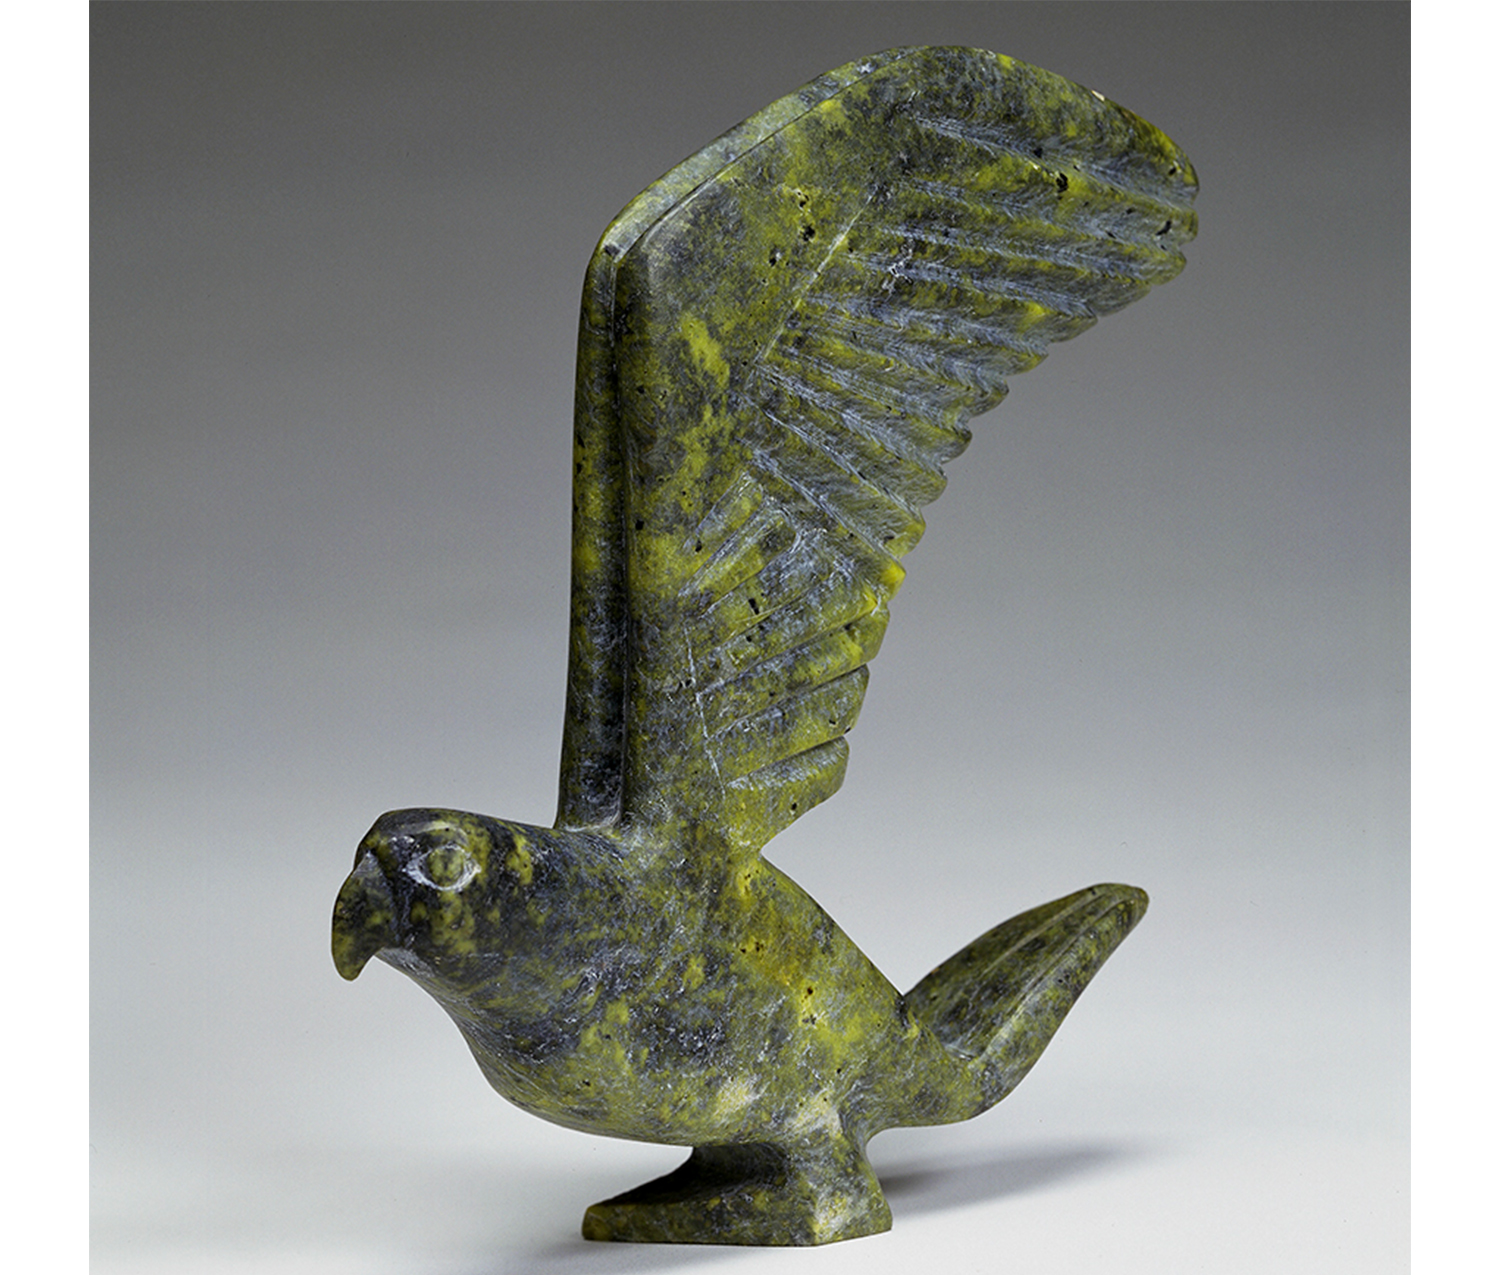 green sculpture of a bird with large wings